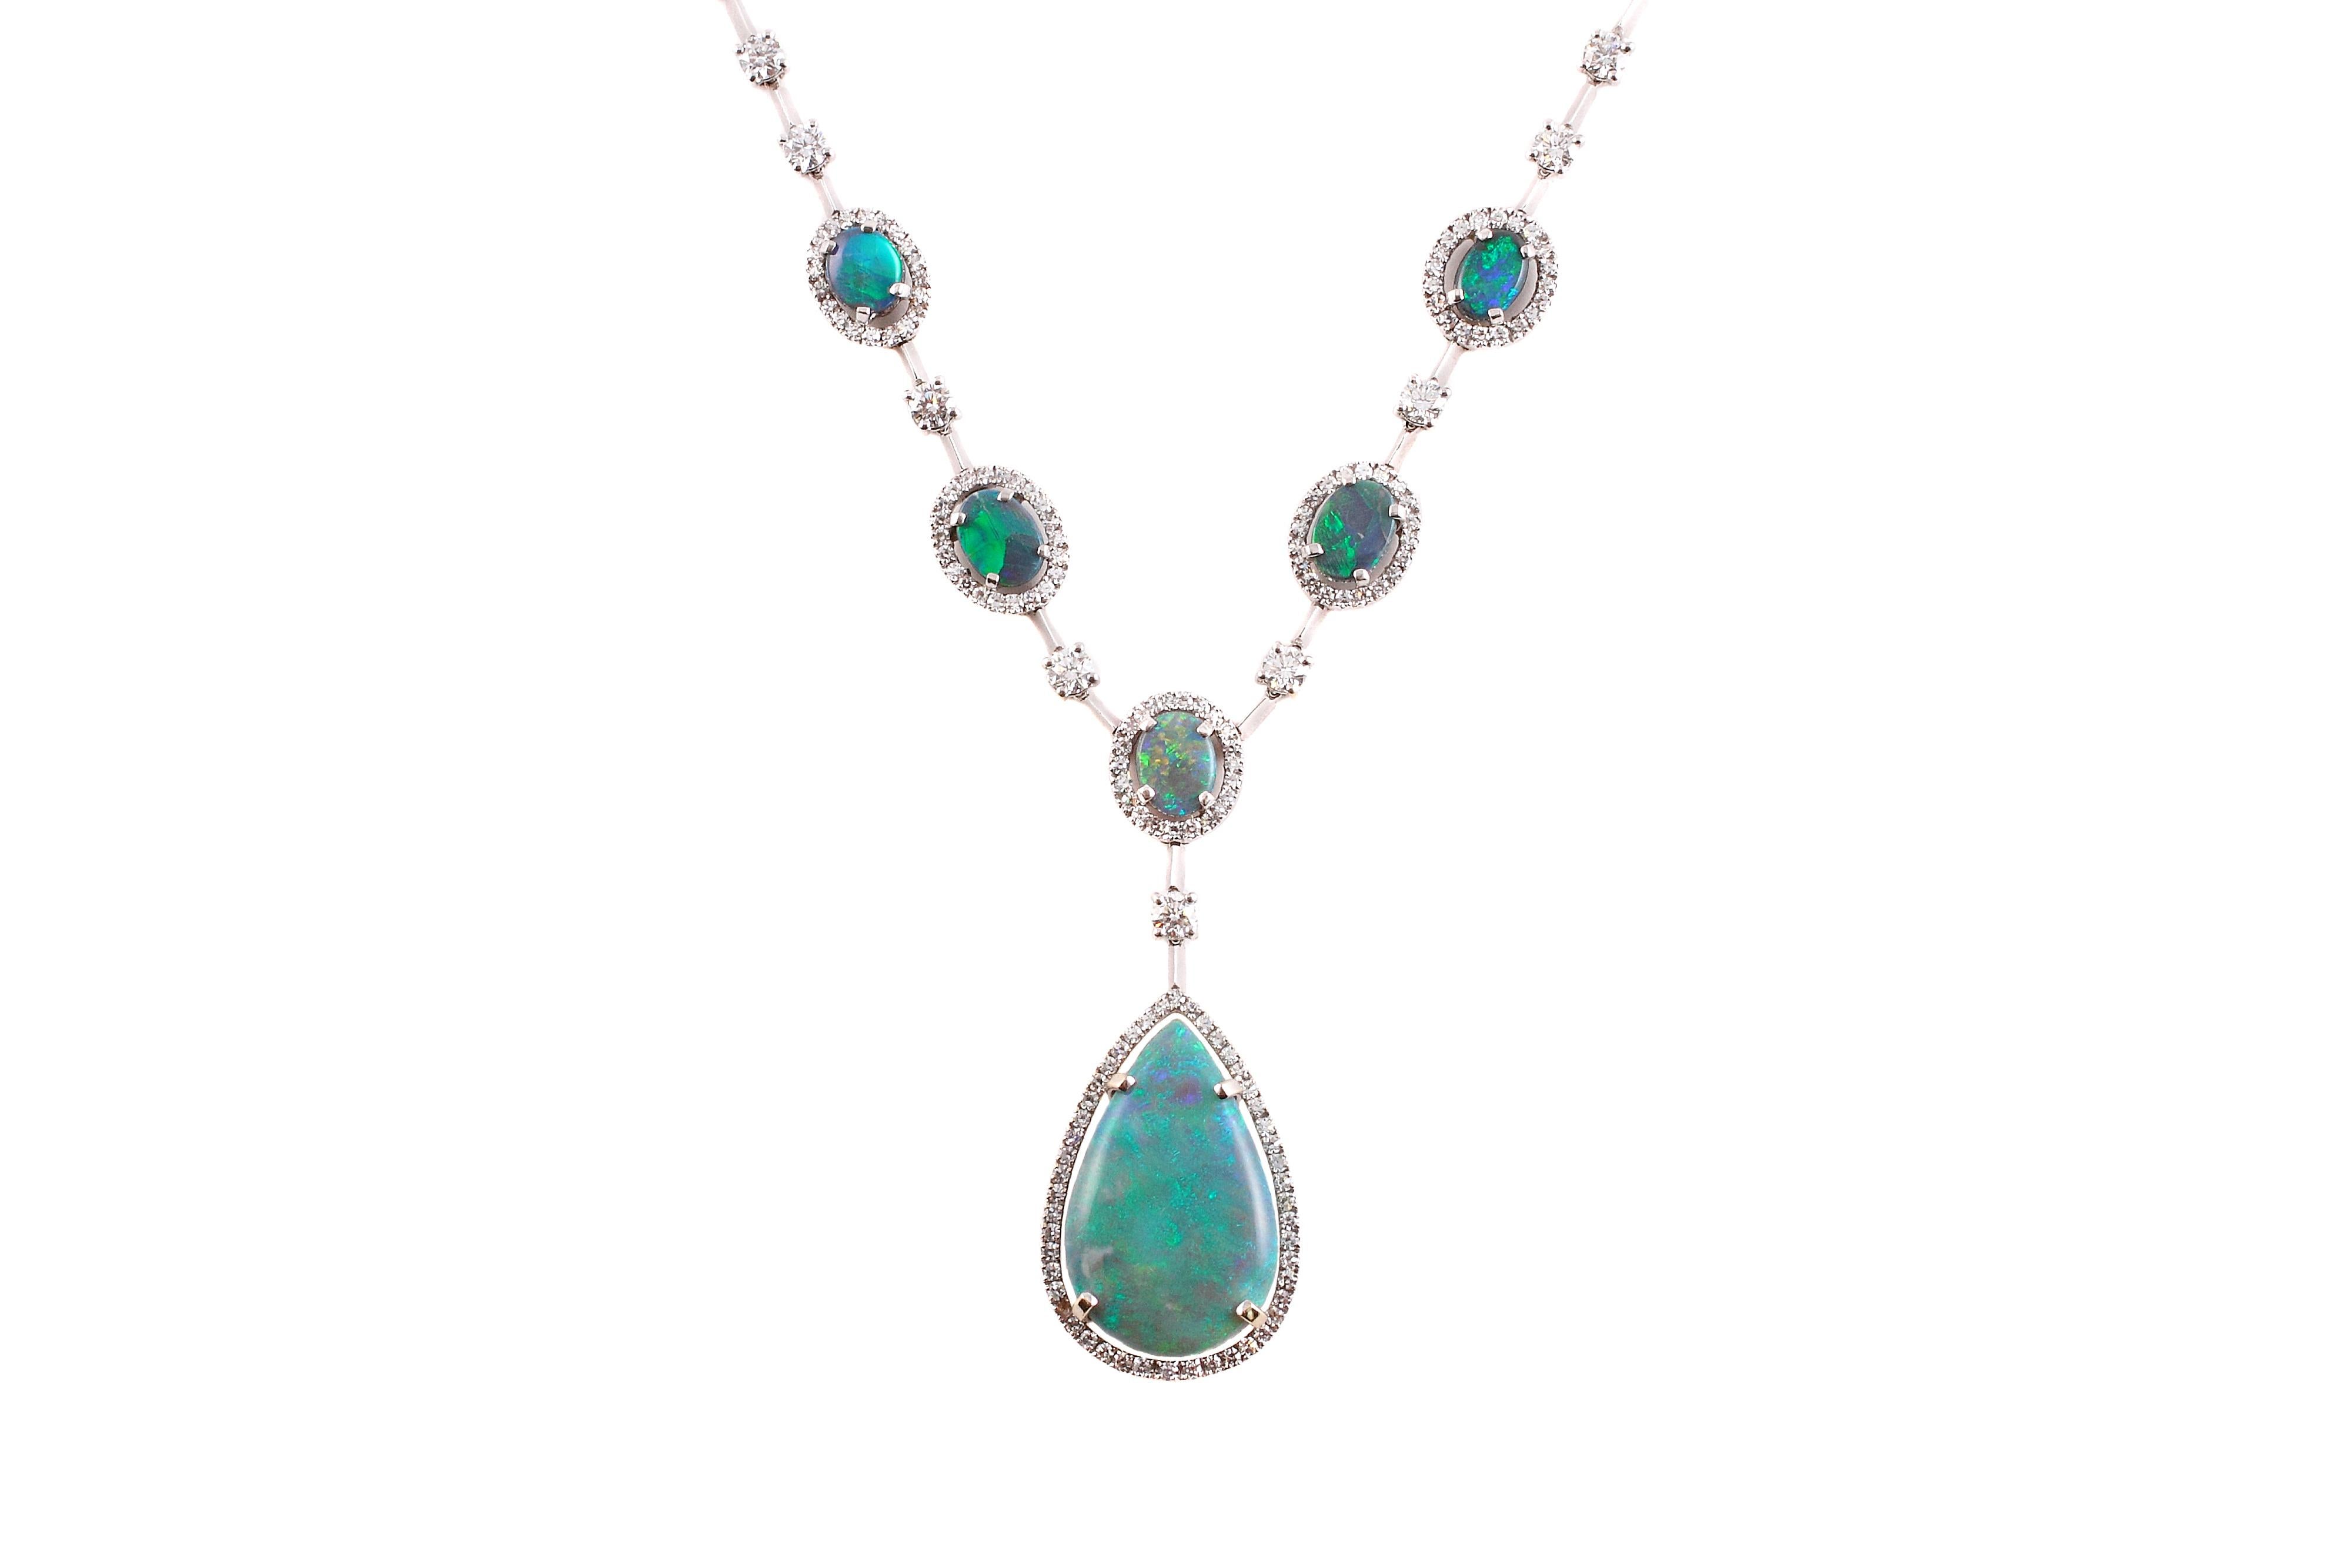 This breathtaking necklace is in 18 karat white gold, measures approximately 17 inches and the stunning opal drop measures approximately 1 1/2